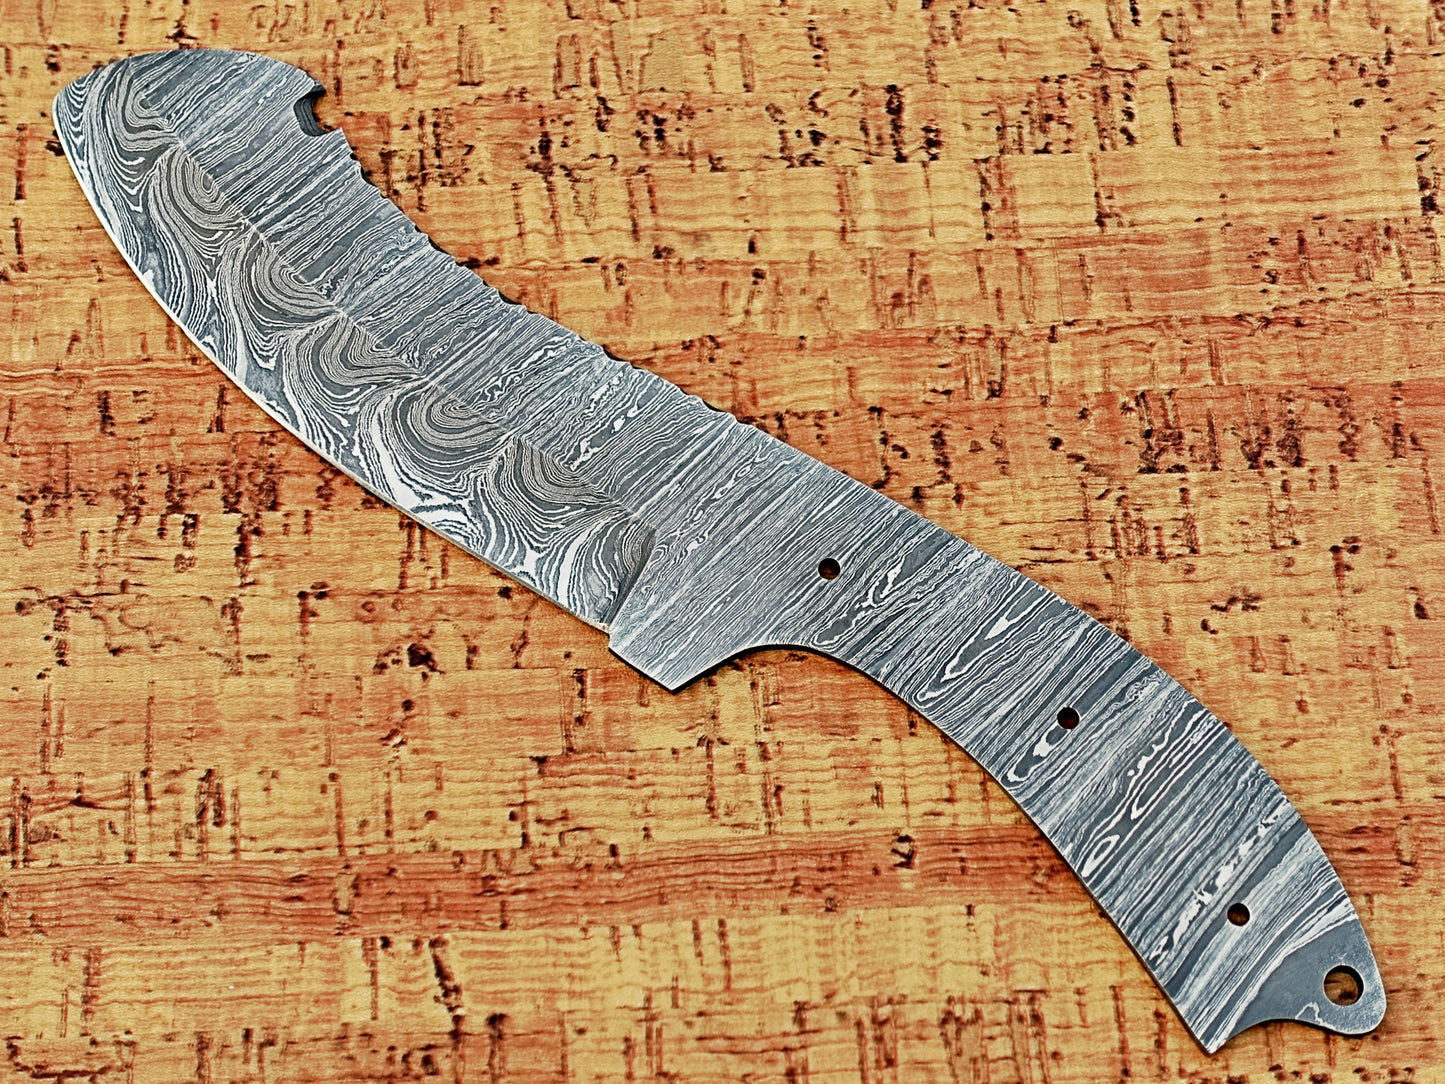 9.5 inches long Damascus steel Nessmuk blade skinning knife, knife making supplies, Hand forged Twist pattern Damascus steel blank blade skinning knife, 4.75" cutting edge, 4.5" scale space